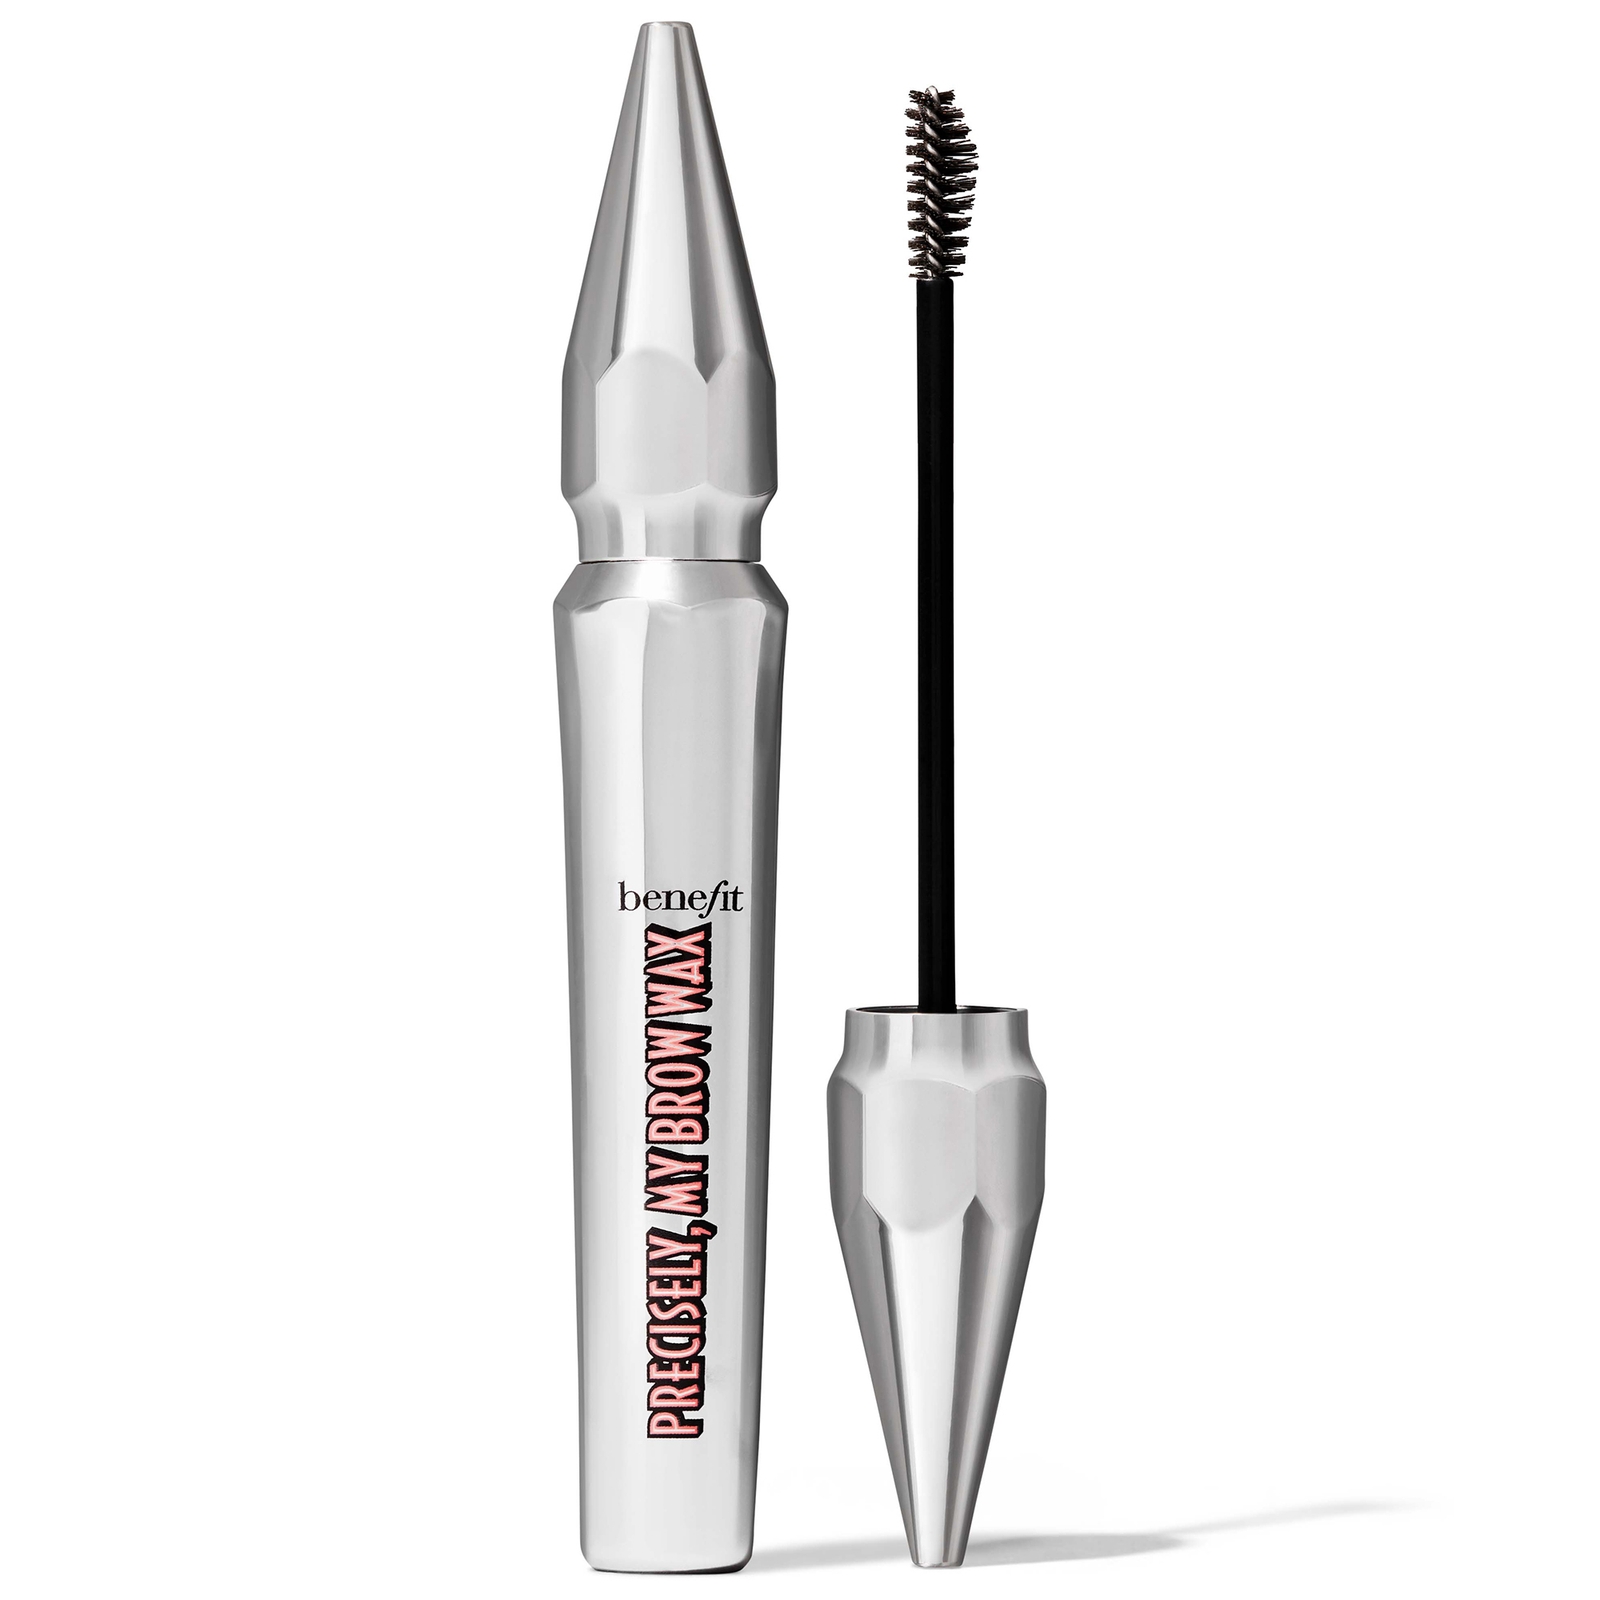 benefit Precisely My Brow Full Pigment Sculpting Brow Wax 5g (Various Shades) - 2.5 Neutral Blonde